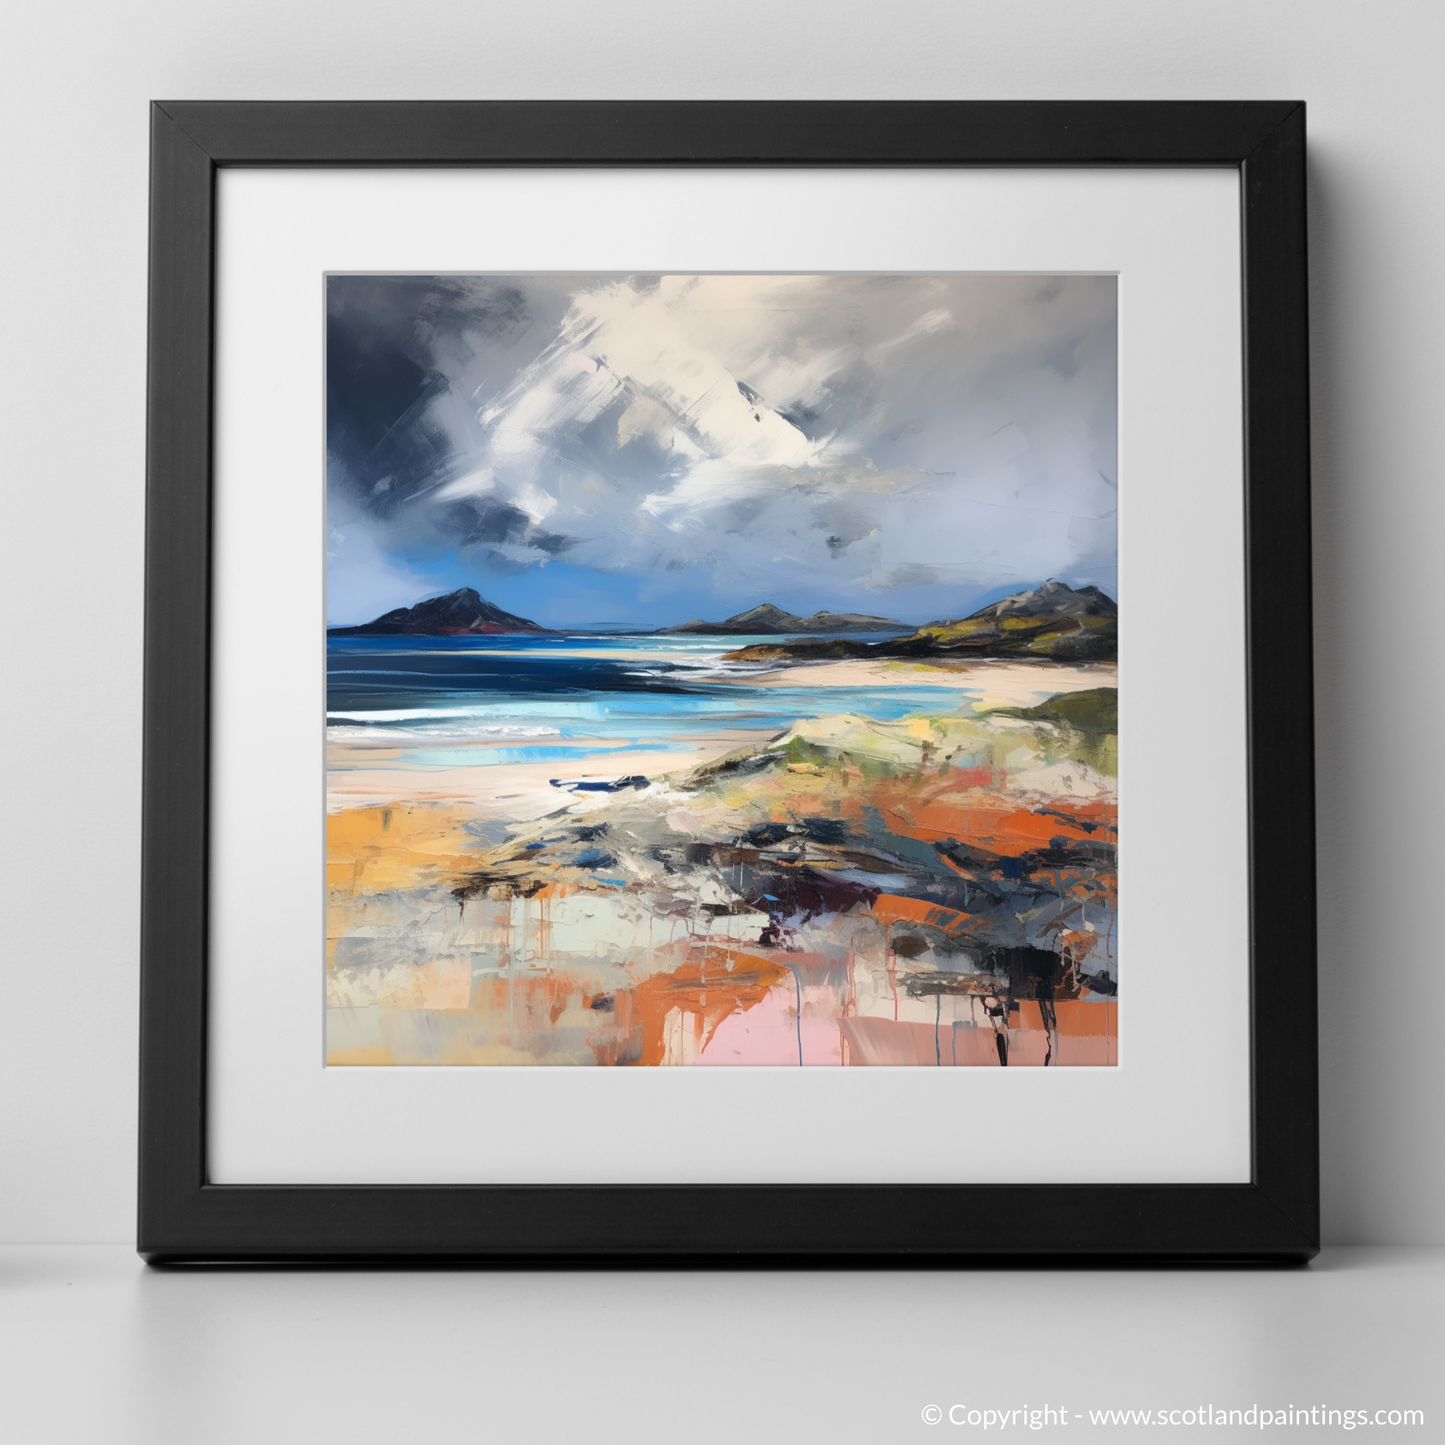 Tempest at Arisaig: An Abstract Expressionist Ode to Scotland's Rugged Coast